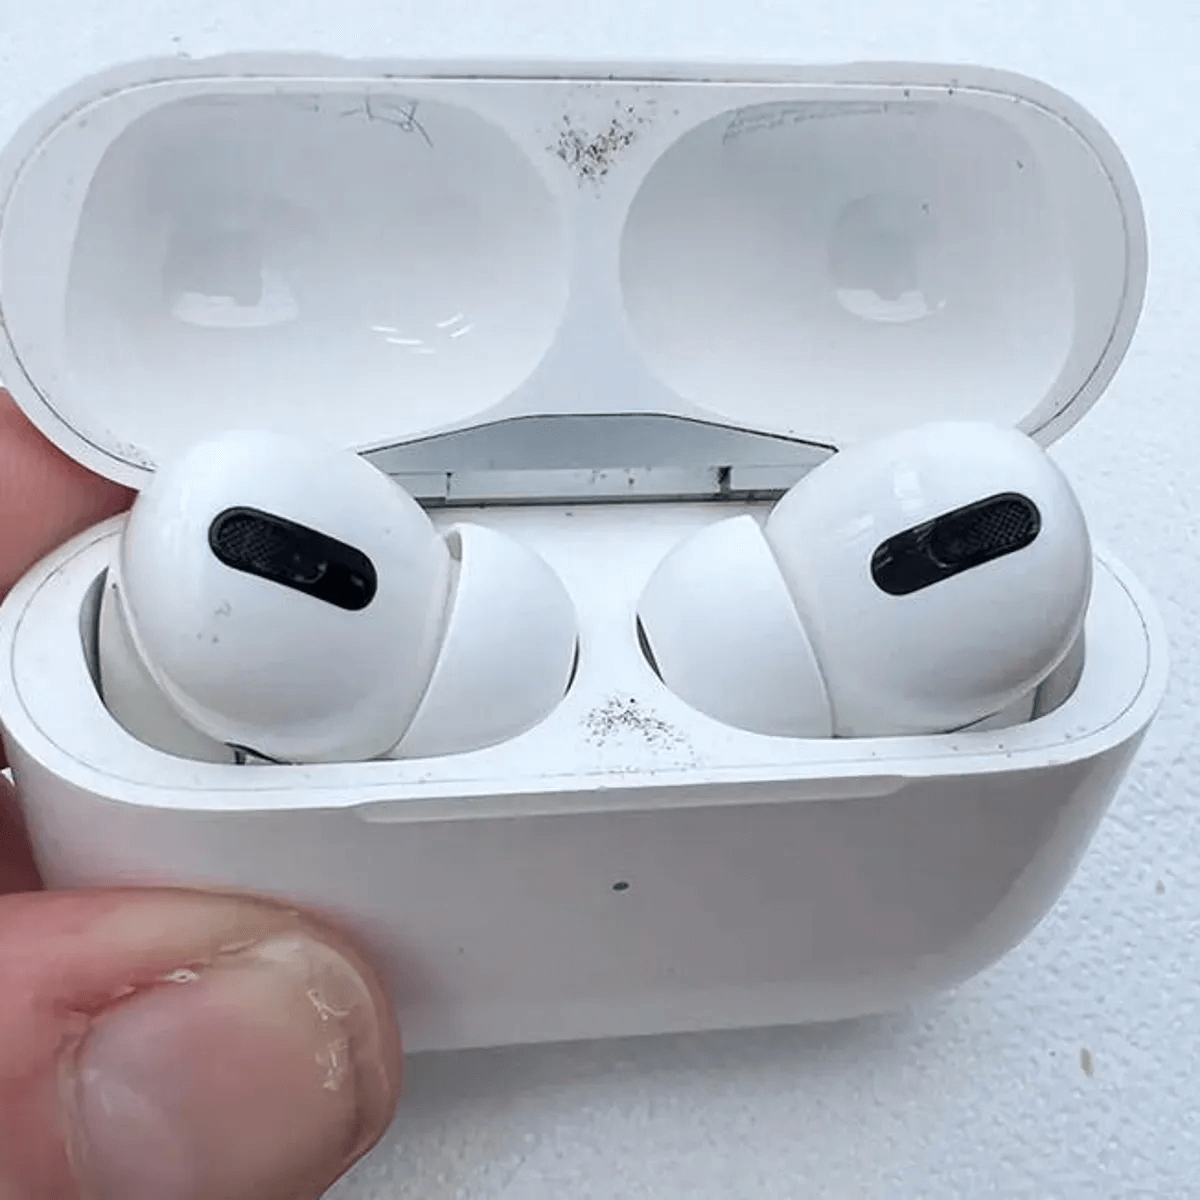 dirty-or-damaged-airpods-wont-connect-iphone